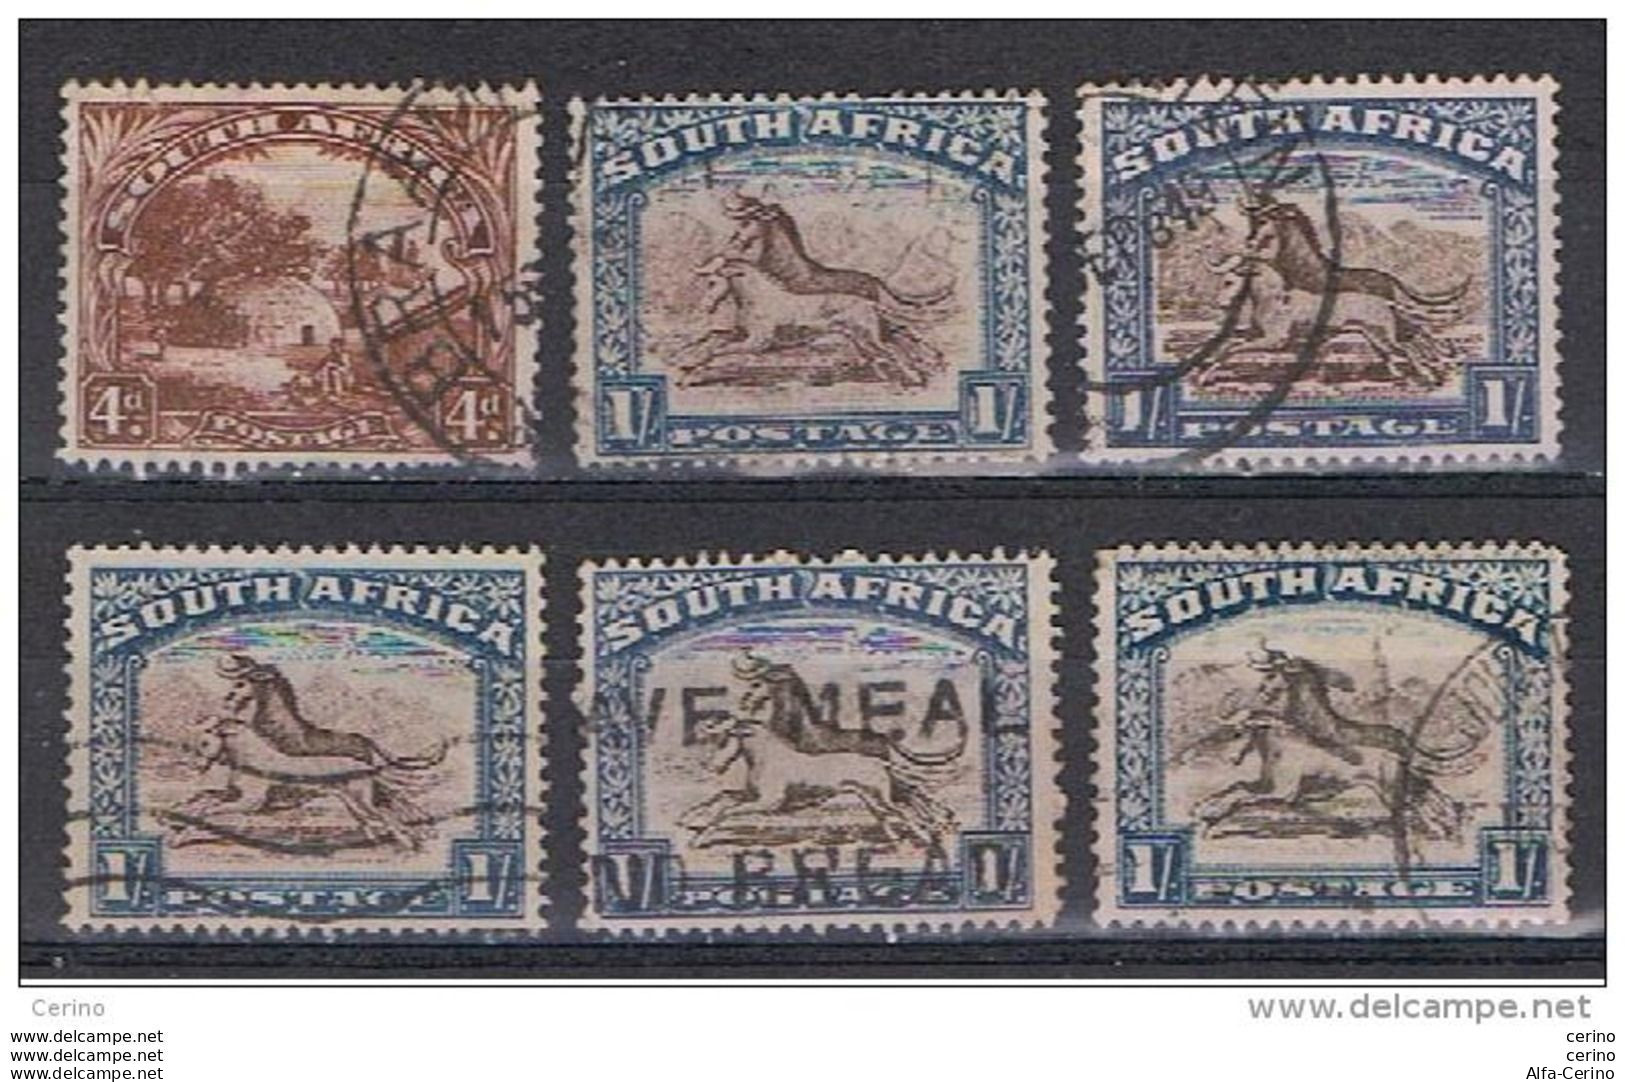 SOUTH   AFRICA:  1927/28  ORDINARY  SERIES  -  LOT  6  USED  STAMPS  -  YV/TELL. 26 + 27x5 - Usados